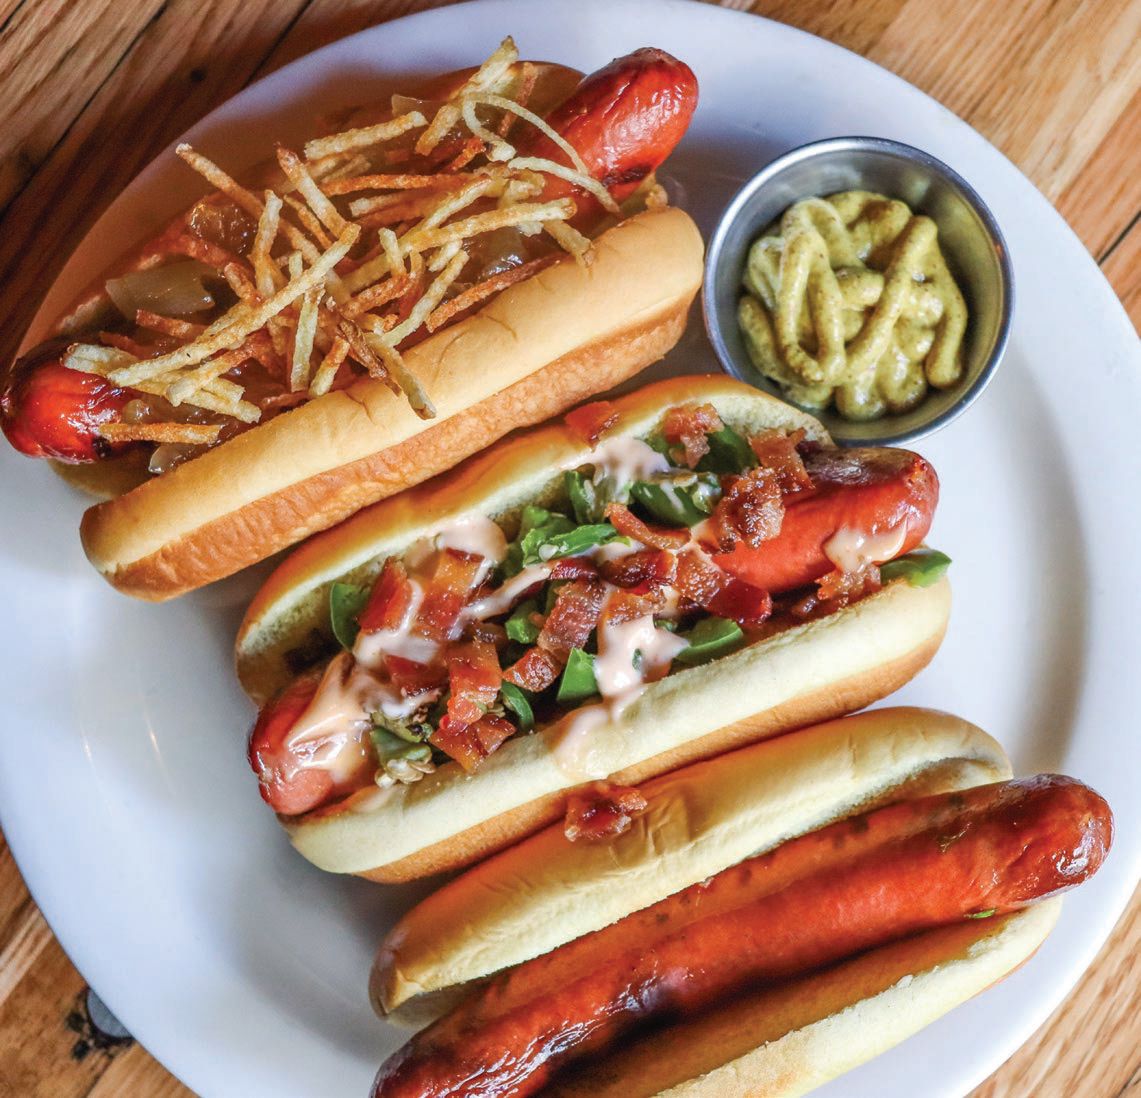 Loaded hot dogs from Whitmans PHOTO COURTESY OF WHITMANS MIAMI